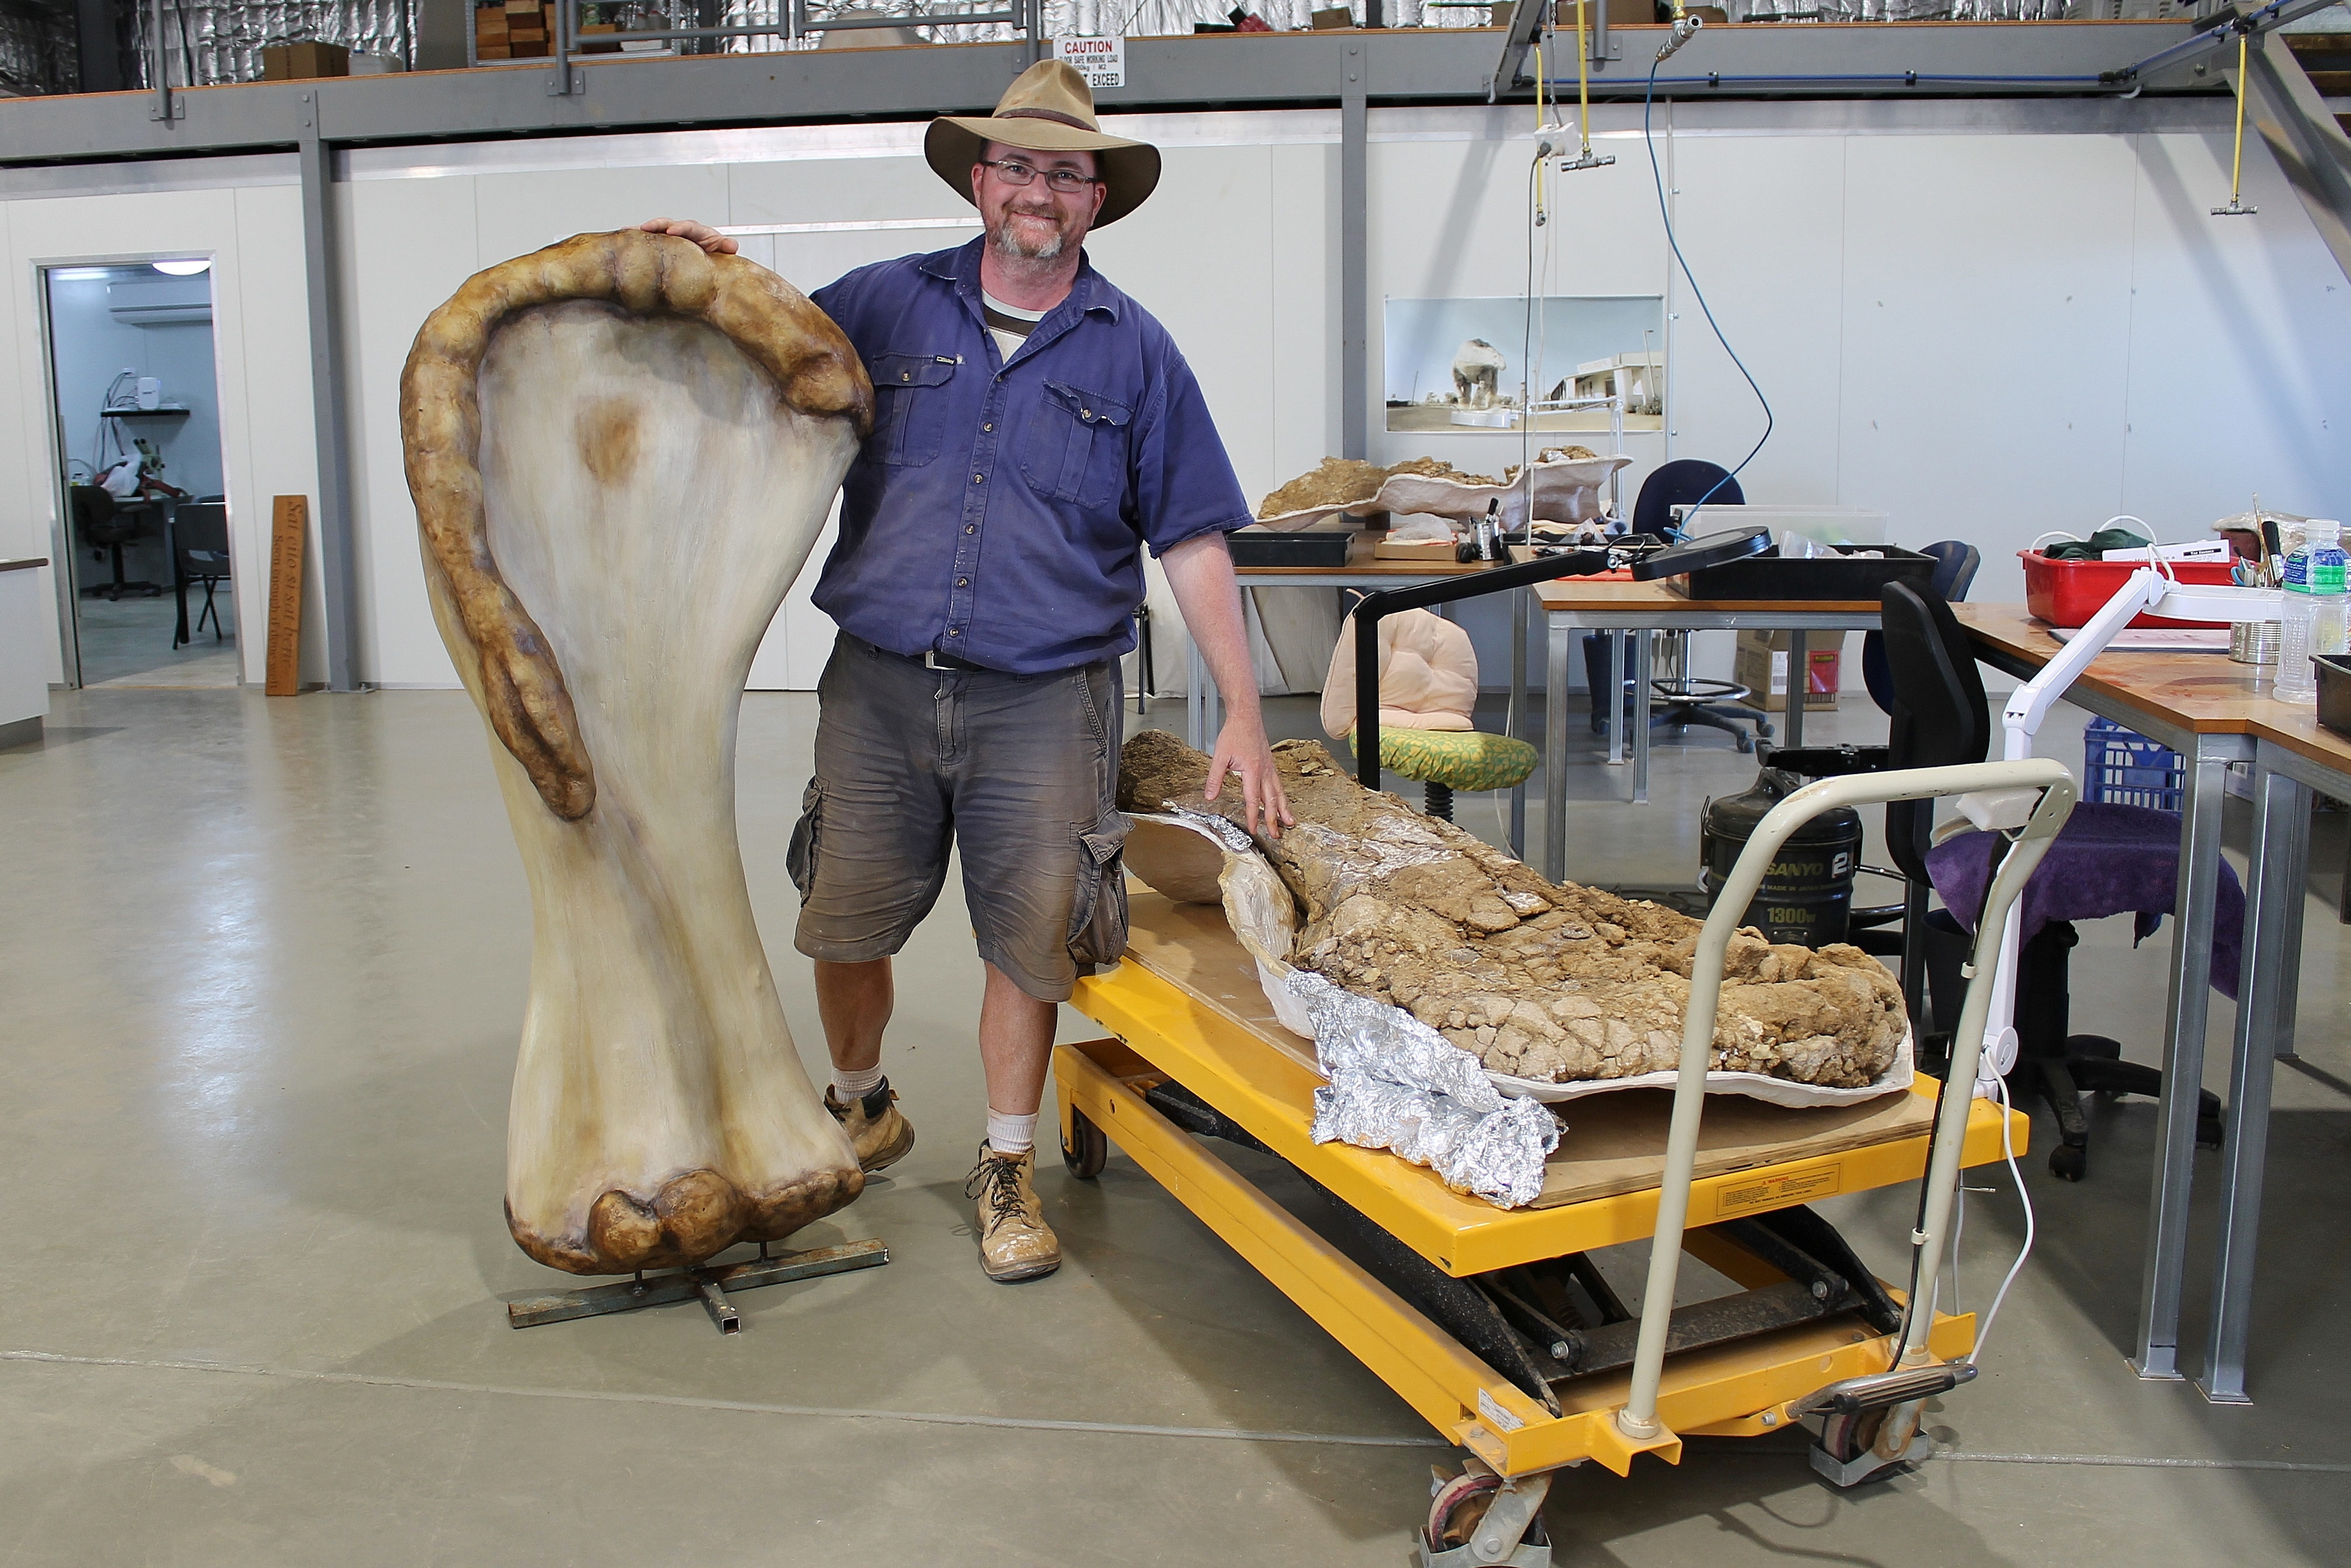 New species of dinosaur unearthed in Queensland confirmed to be largest ever found in Australia